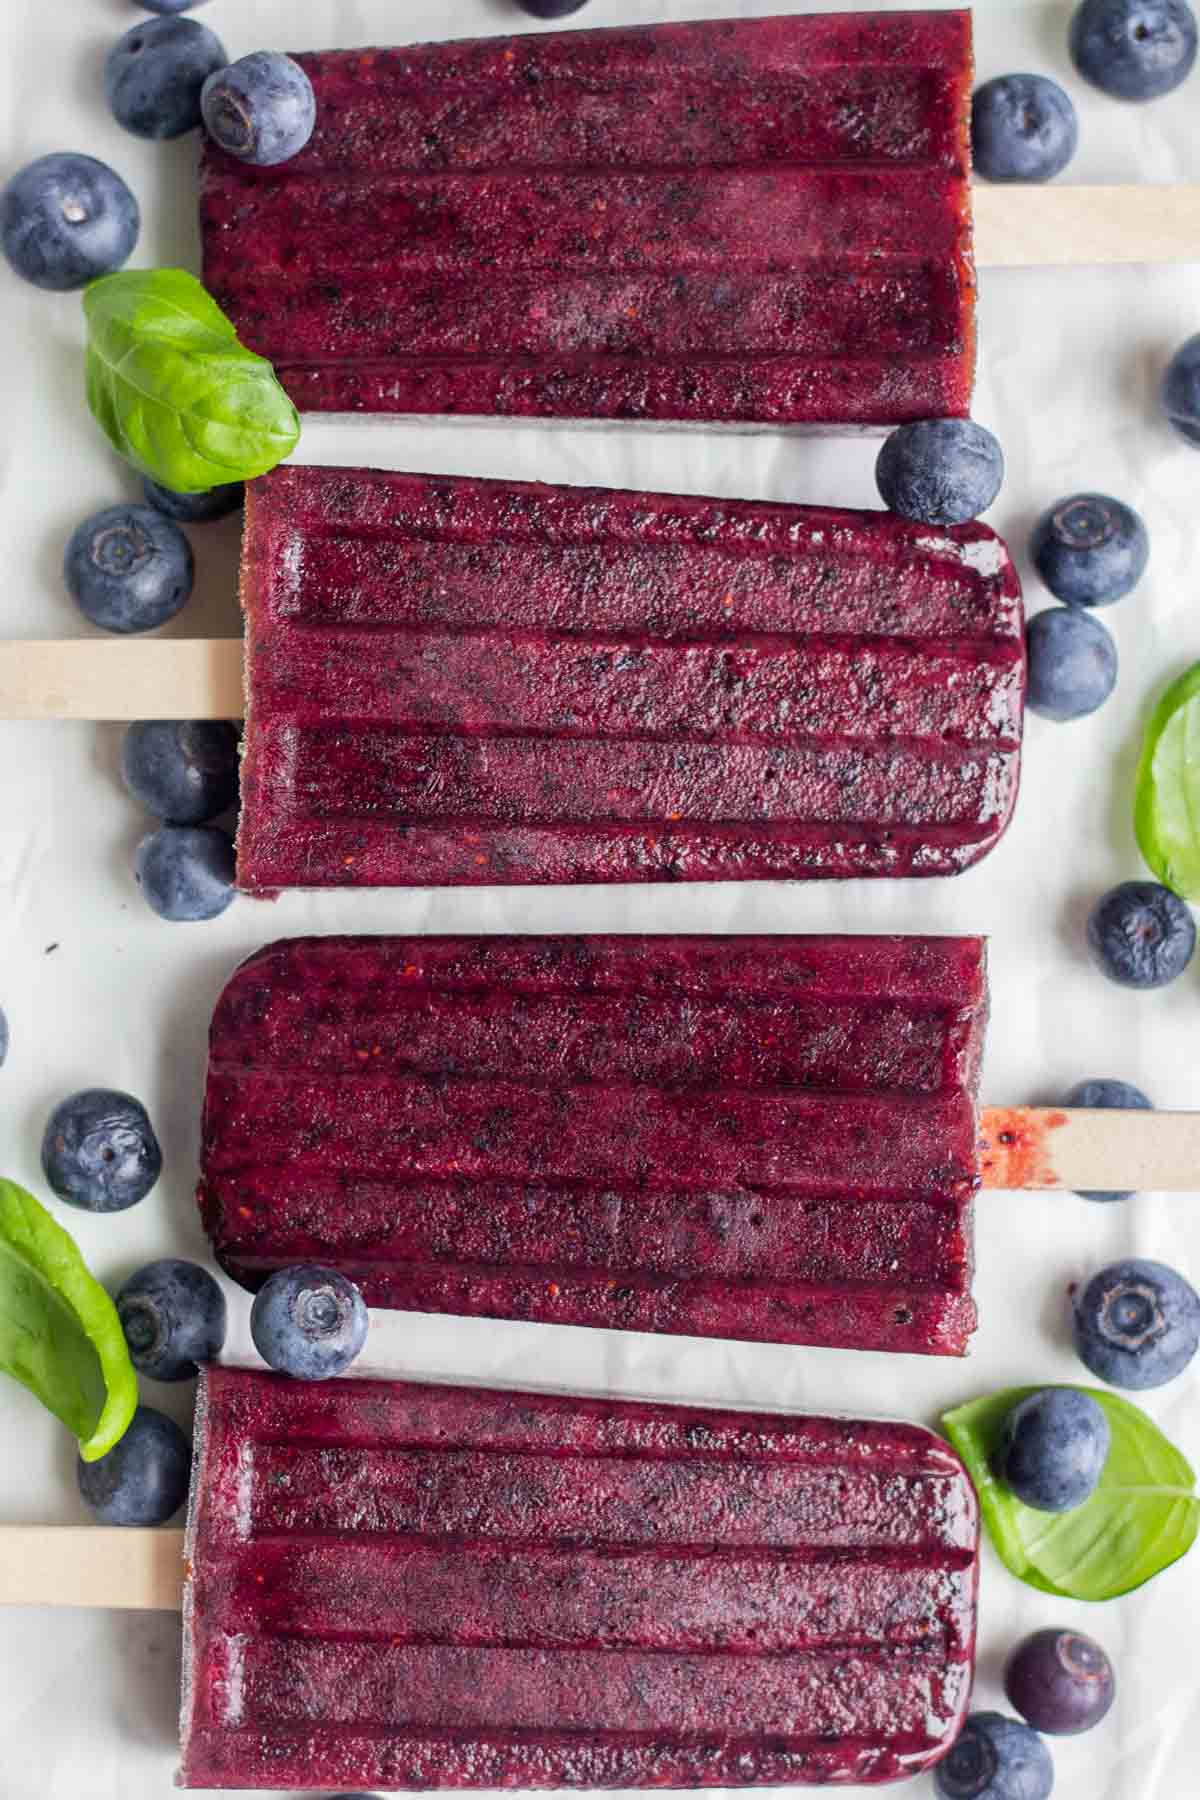 Bird's eye view of four Blueberry Basil Popsicles sitting on a countertop.